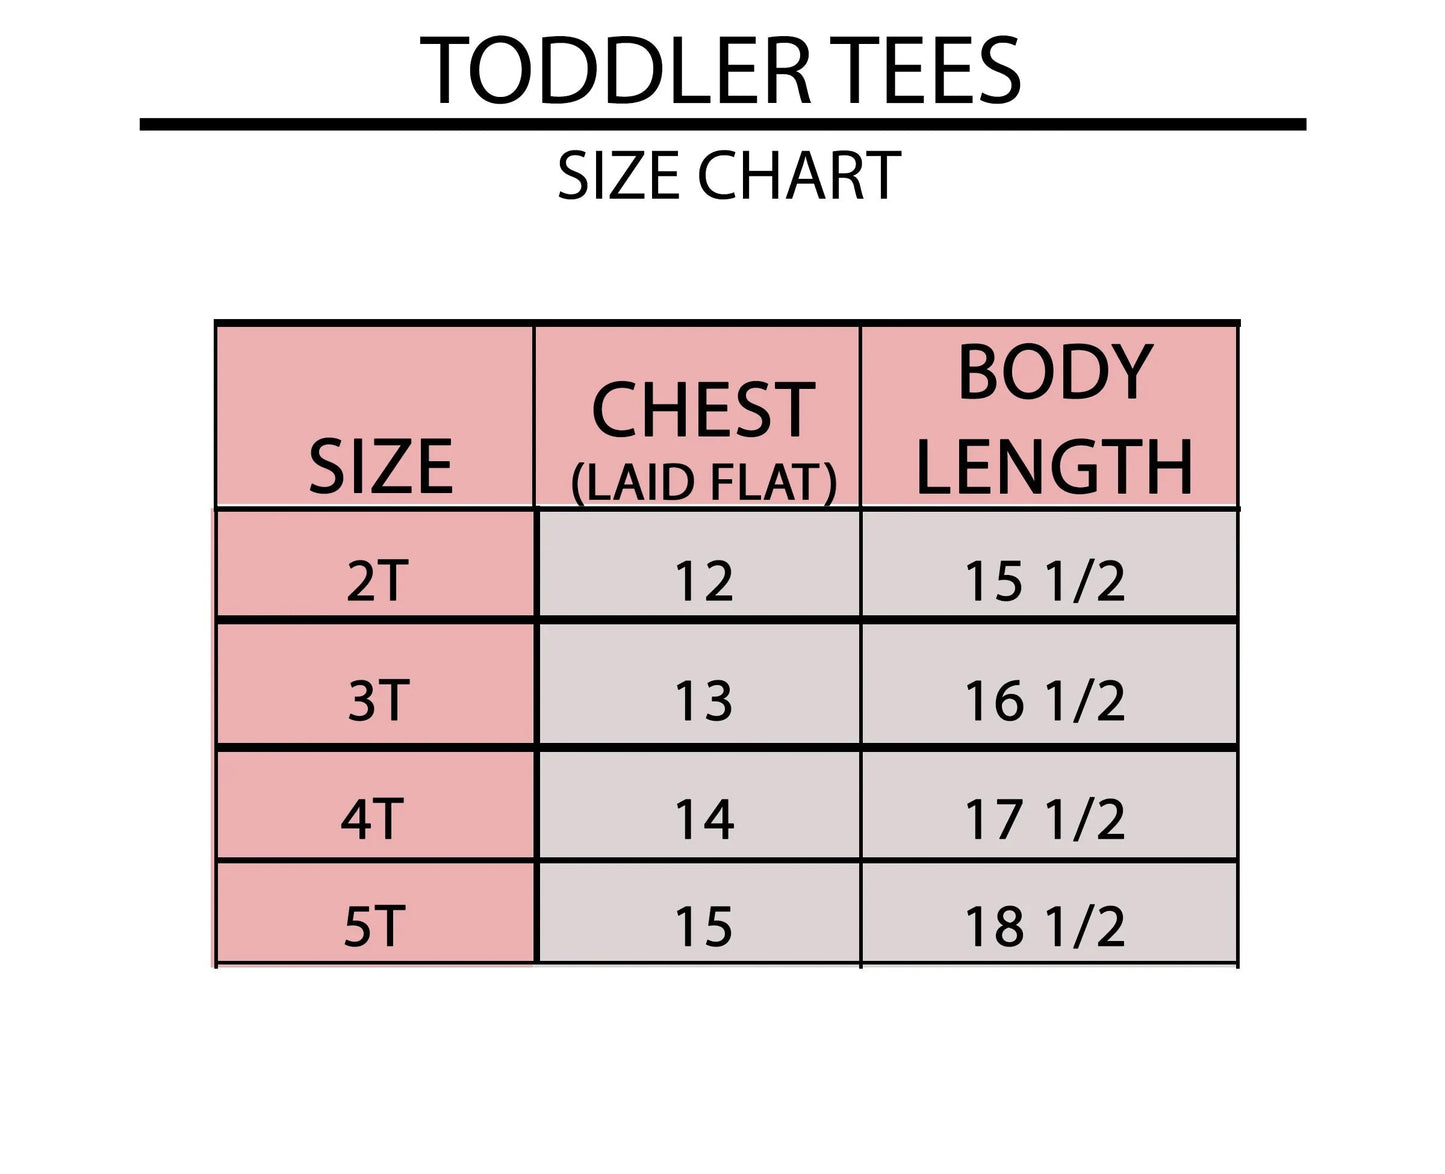 Spotted Bunny With Glasses | Toddler Short Sleeve Crew Neck